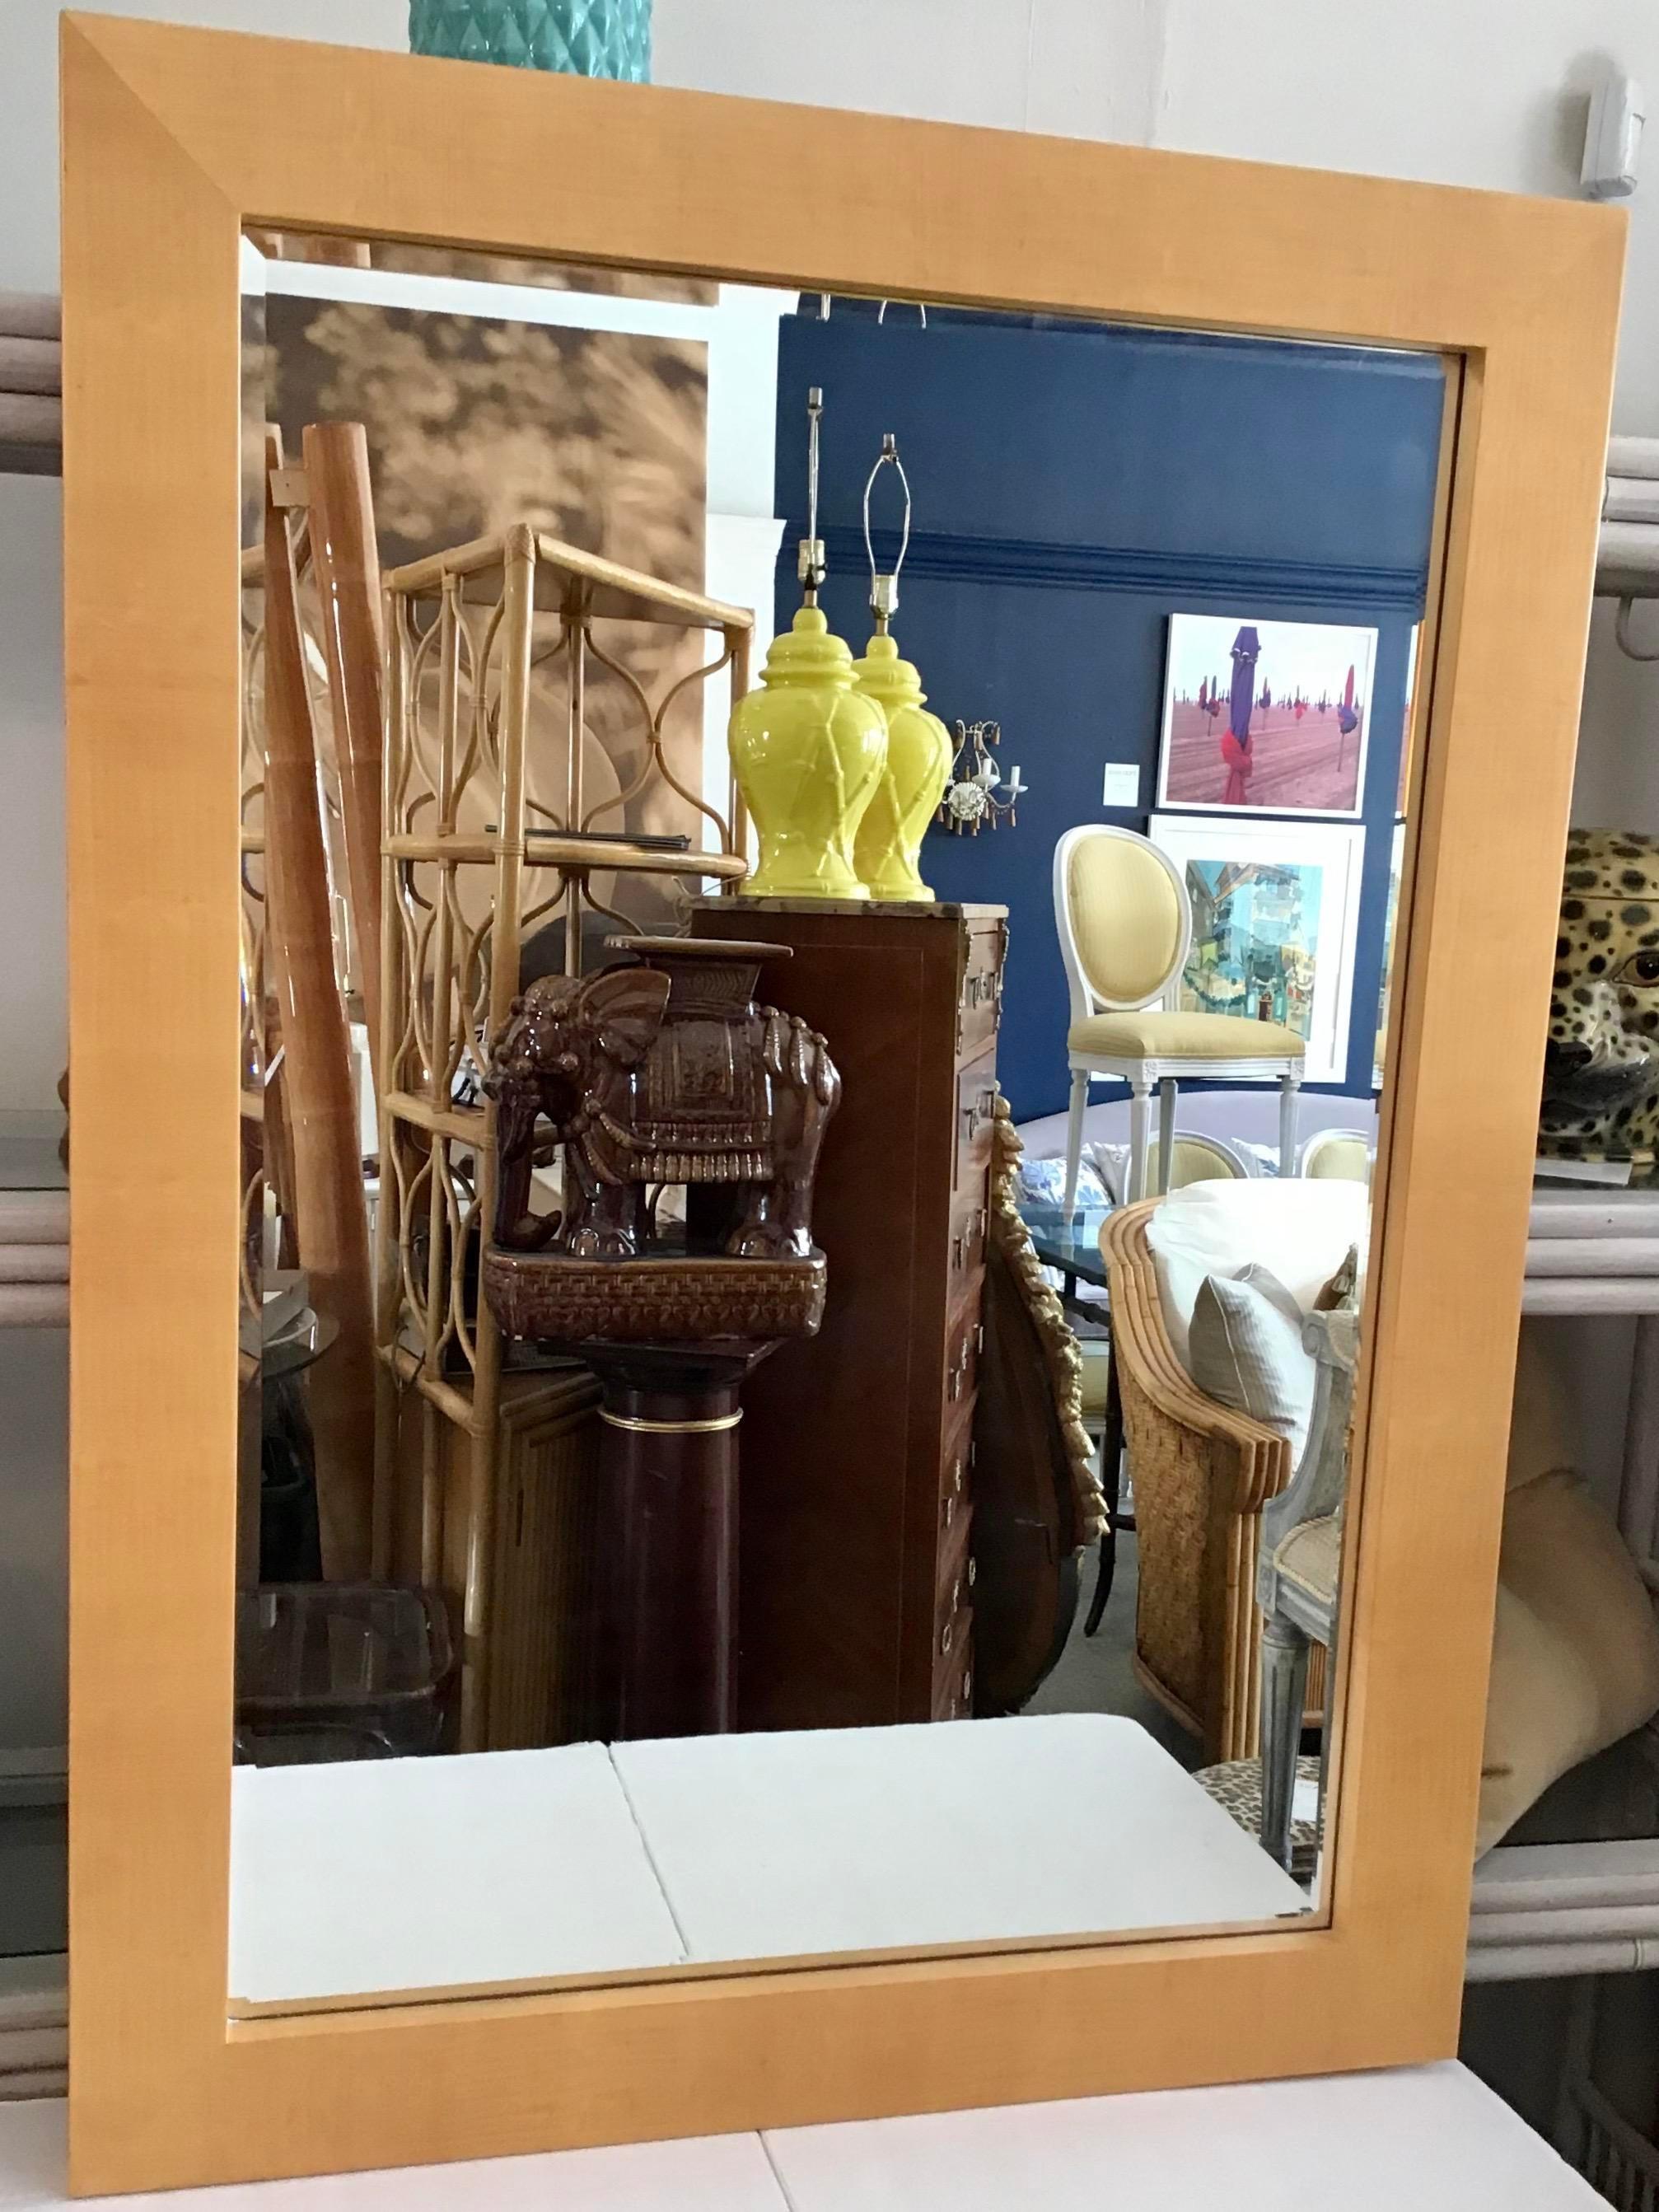 Classic Todd Hase Designed Anna Mirror with English Sycamore Marquetry. Very simple Modern Mirror with quality marquetry. This Mirror mount flush to our wall with a modern wall mount clip. Showroom Samples priced below standard showroom pricing. So